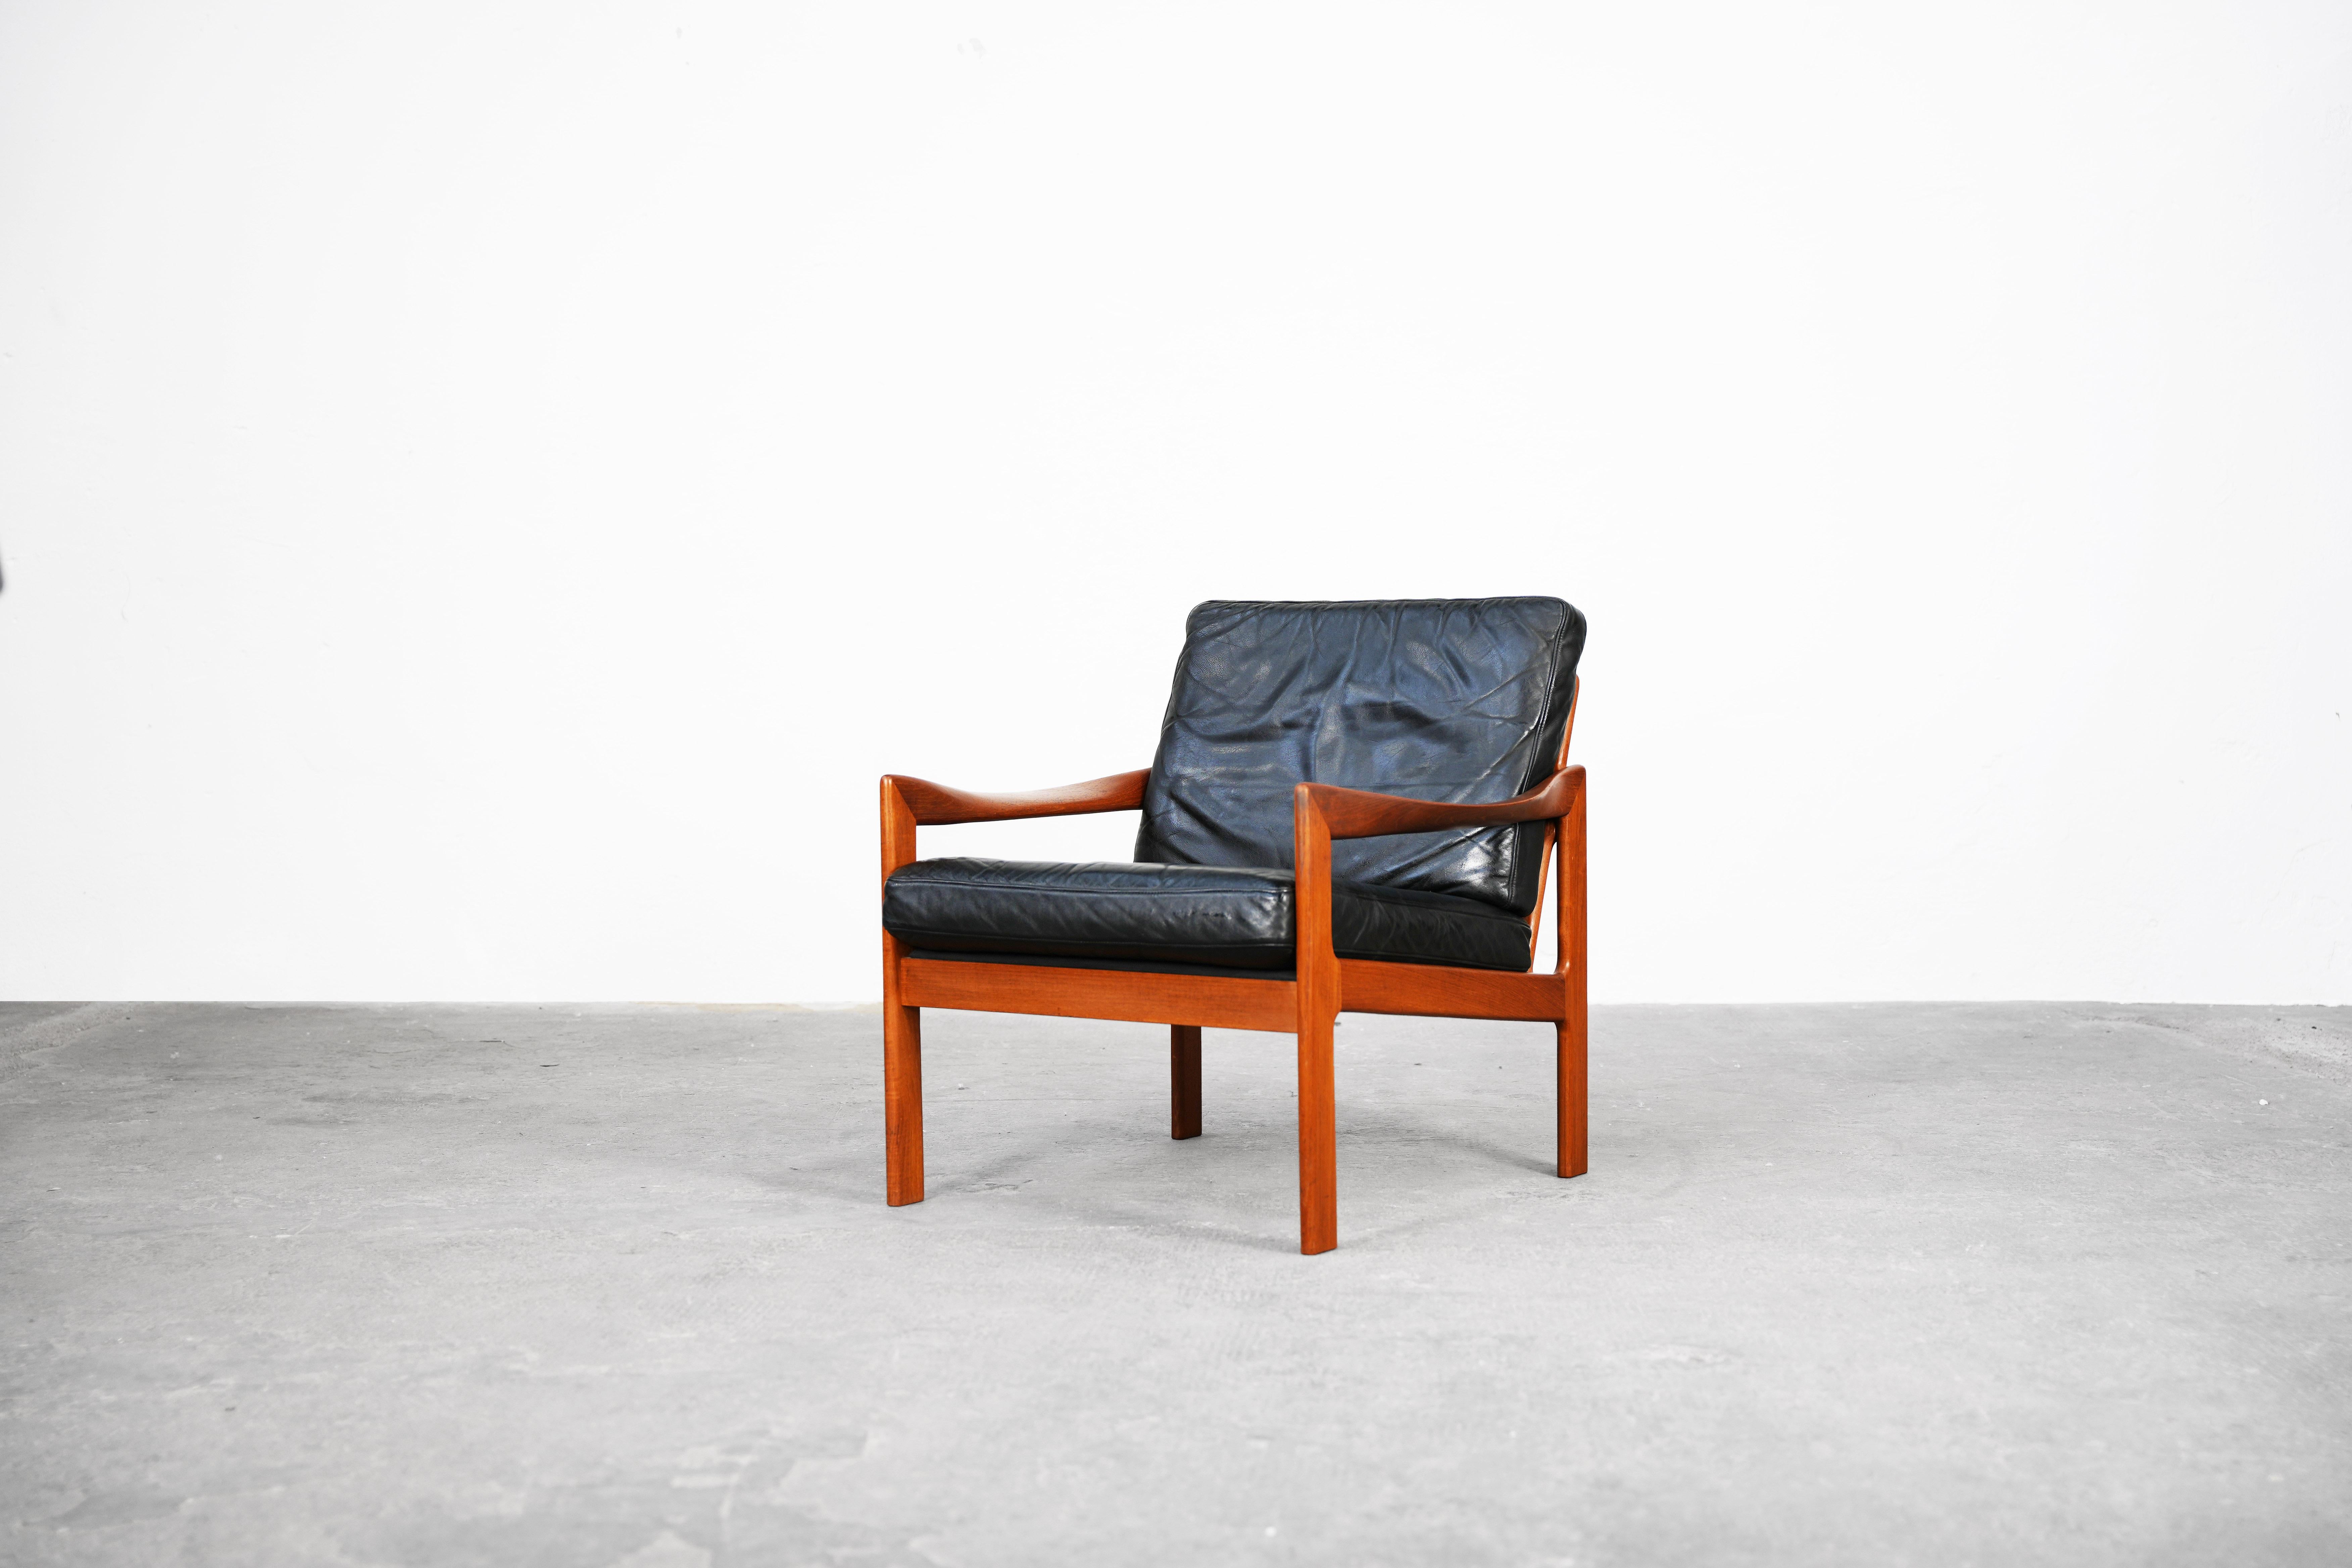 Beautiful lounge chair designed by Illum Wikkelsø for Niels Eilersen from the 60s. The lounge chair comes with black leather cushions and teak wood. The Chair is in good condition.